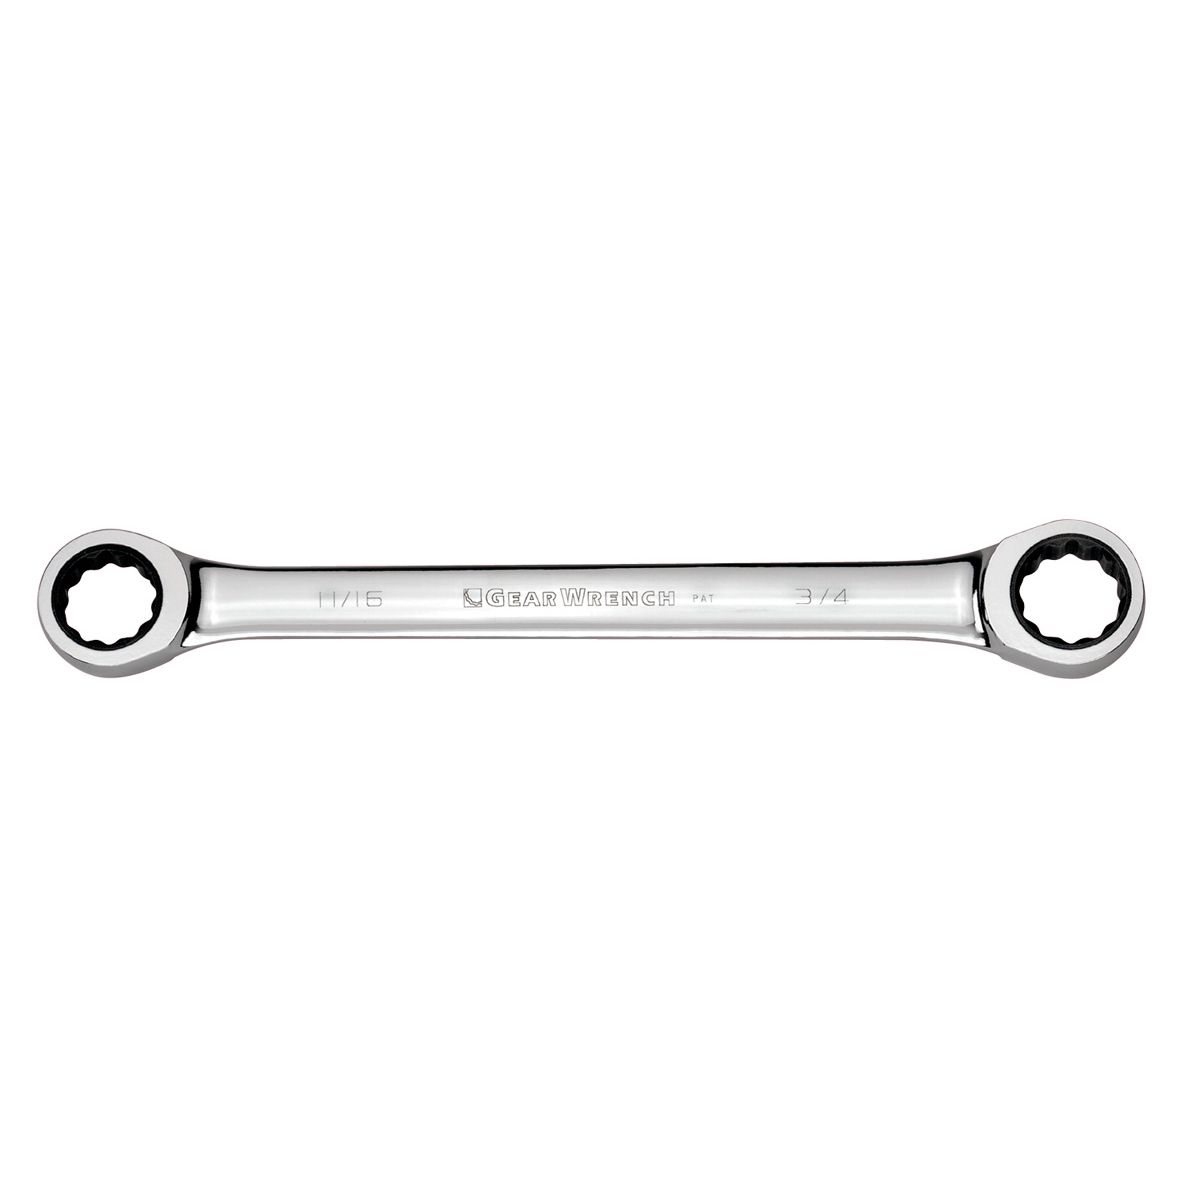 Wrench Ratcheting - Double Box End 11/16 X 3/4In Gearwrench